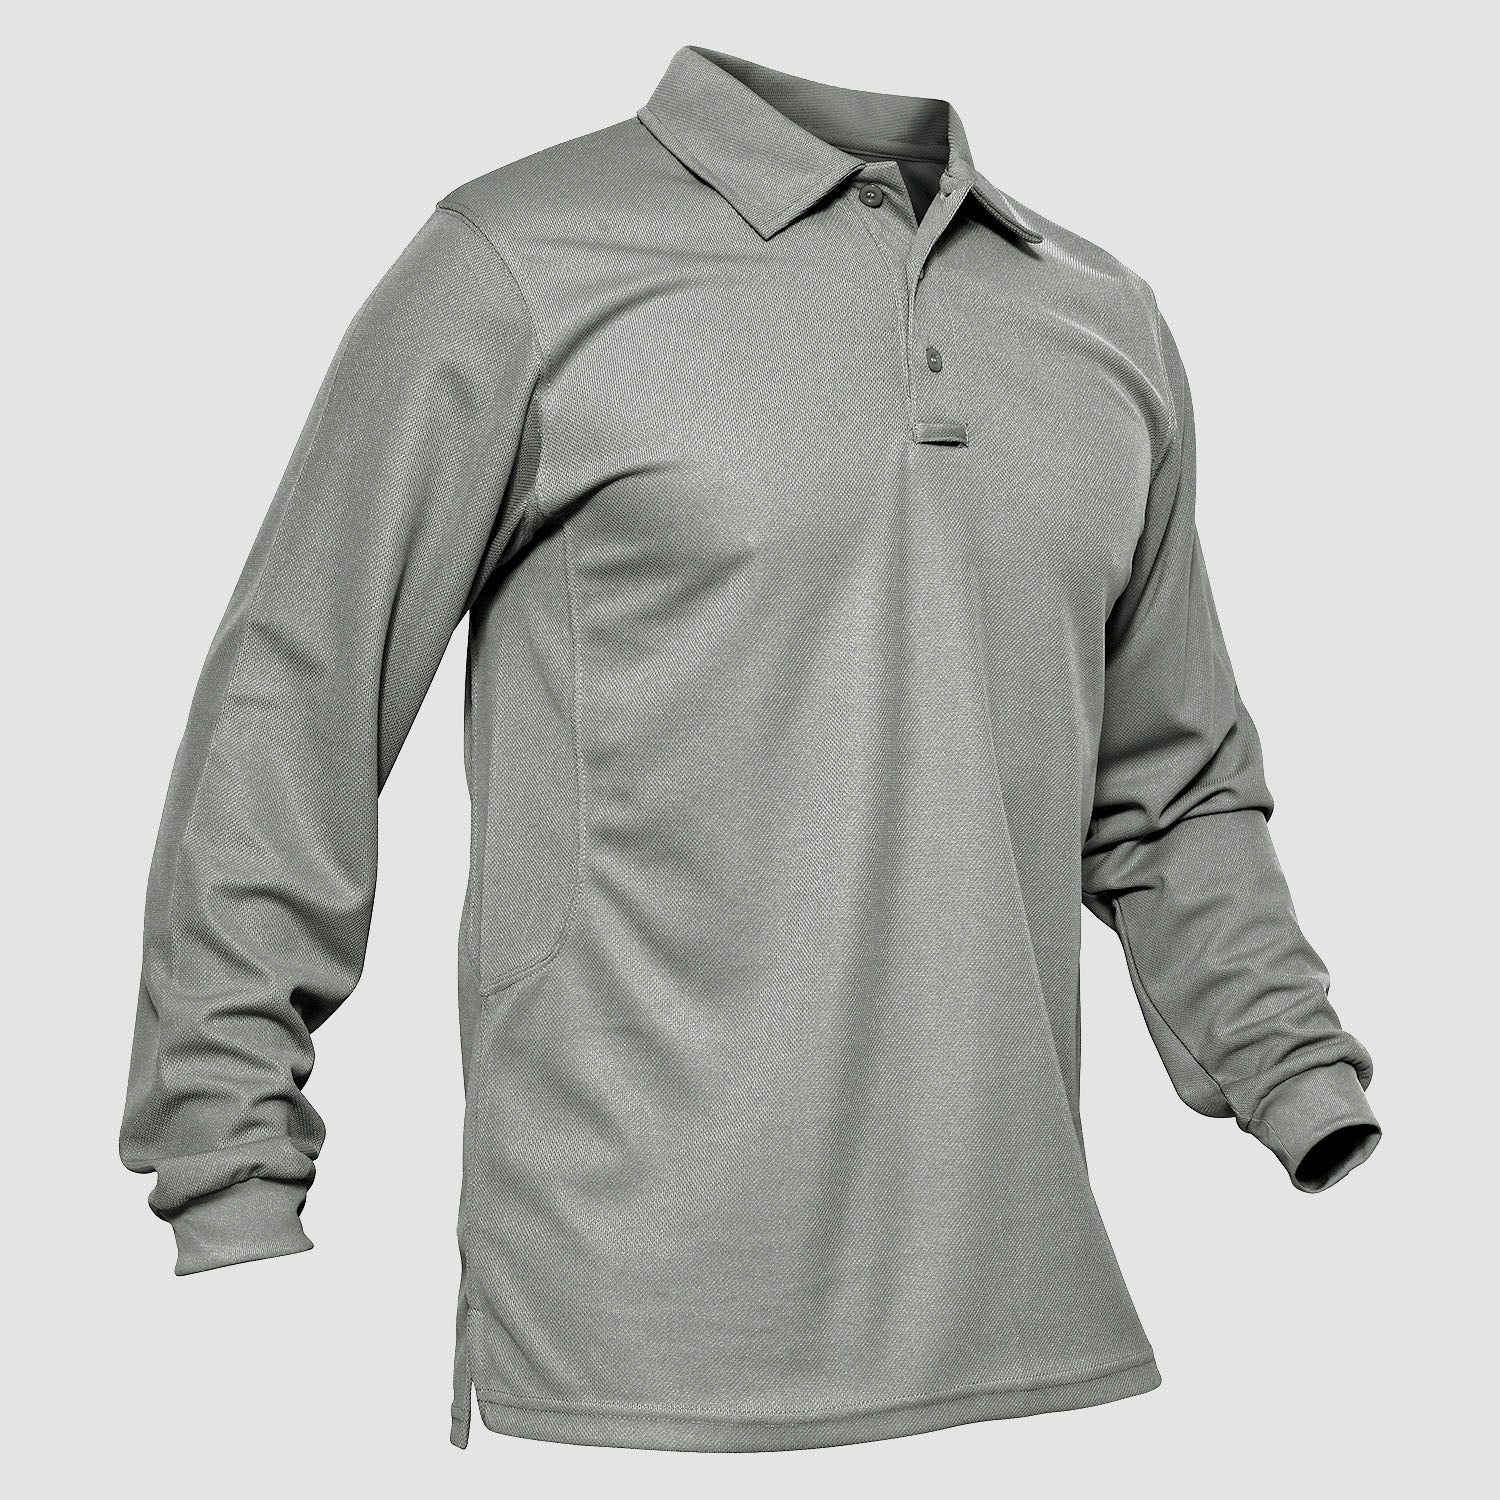 Men's Polo Shirts Tactical Hiking Golf Sport Casual Long Sleeve